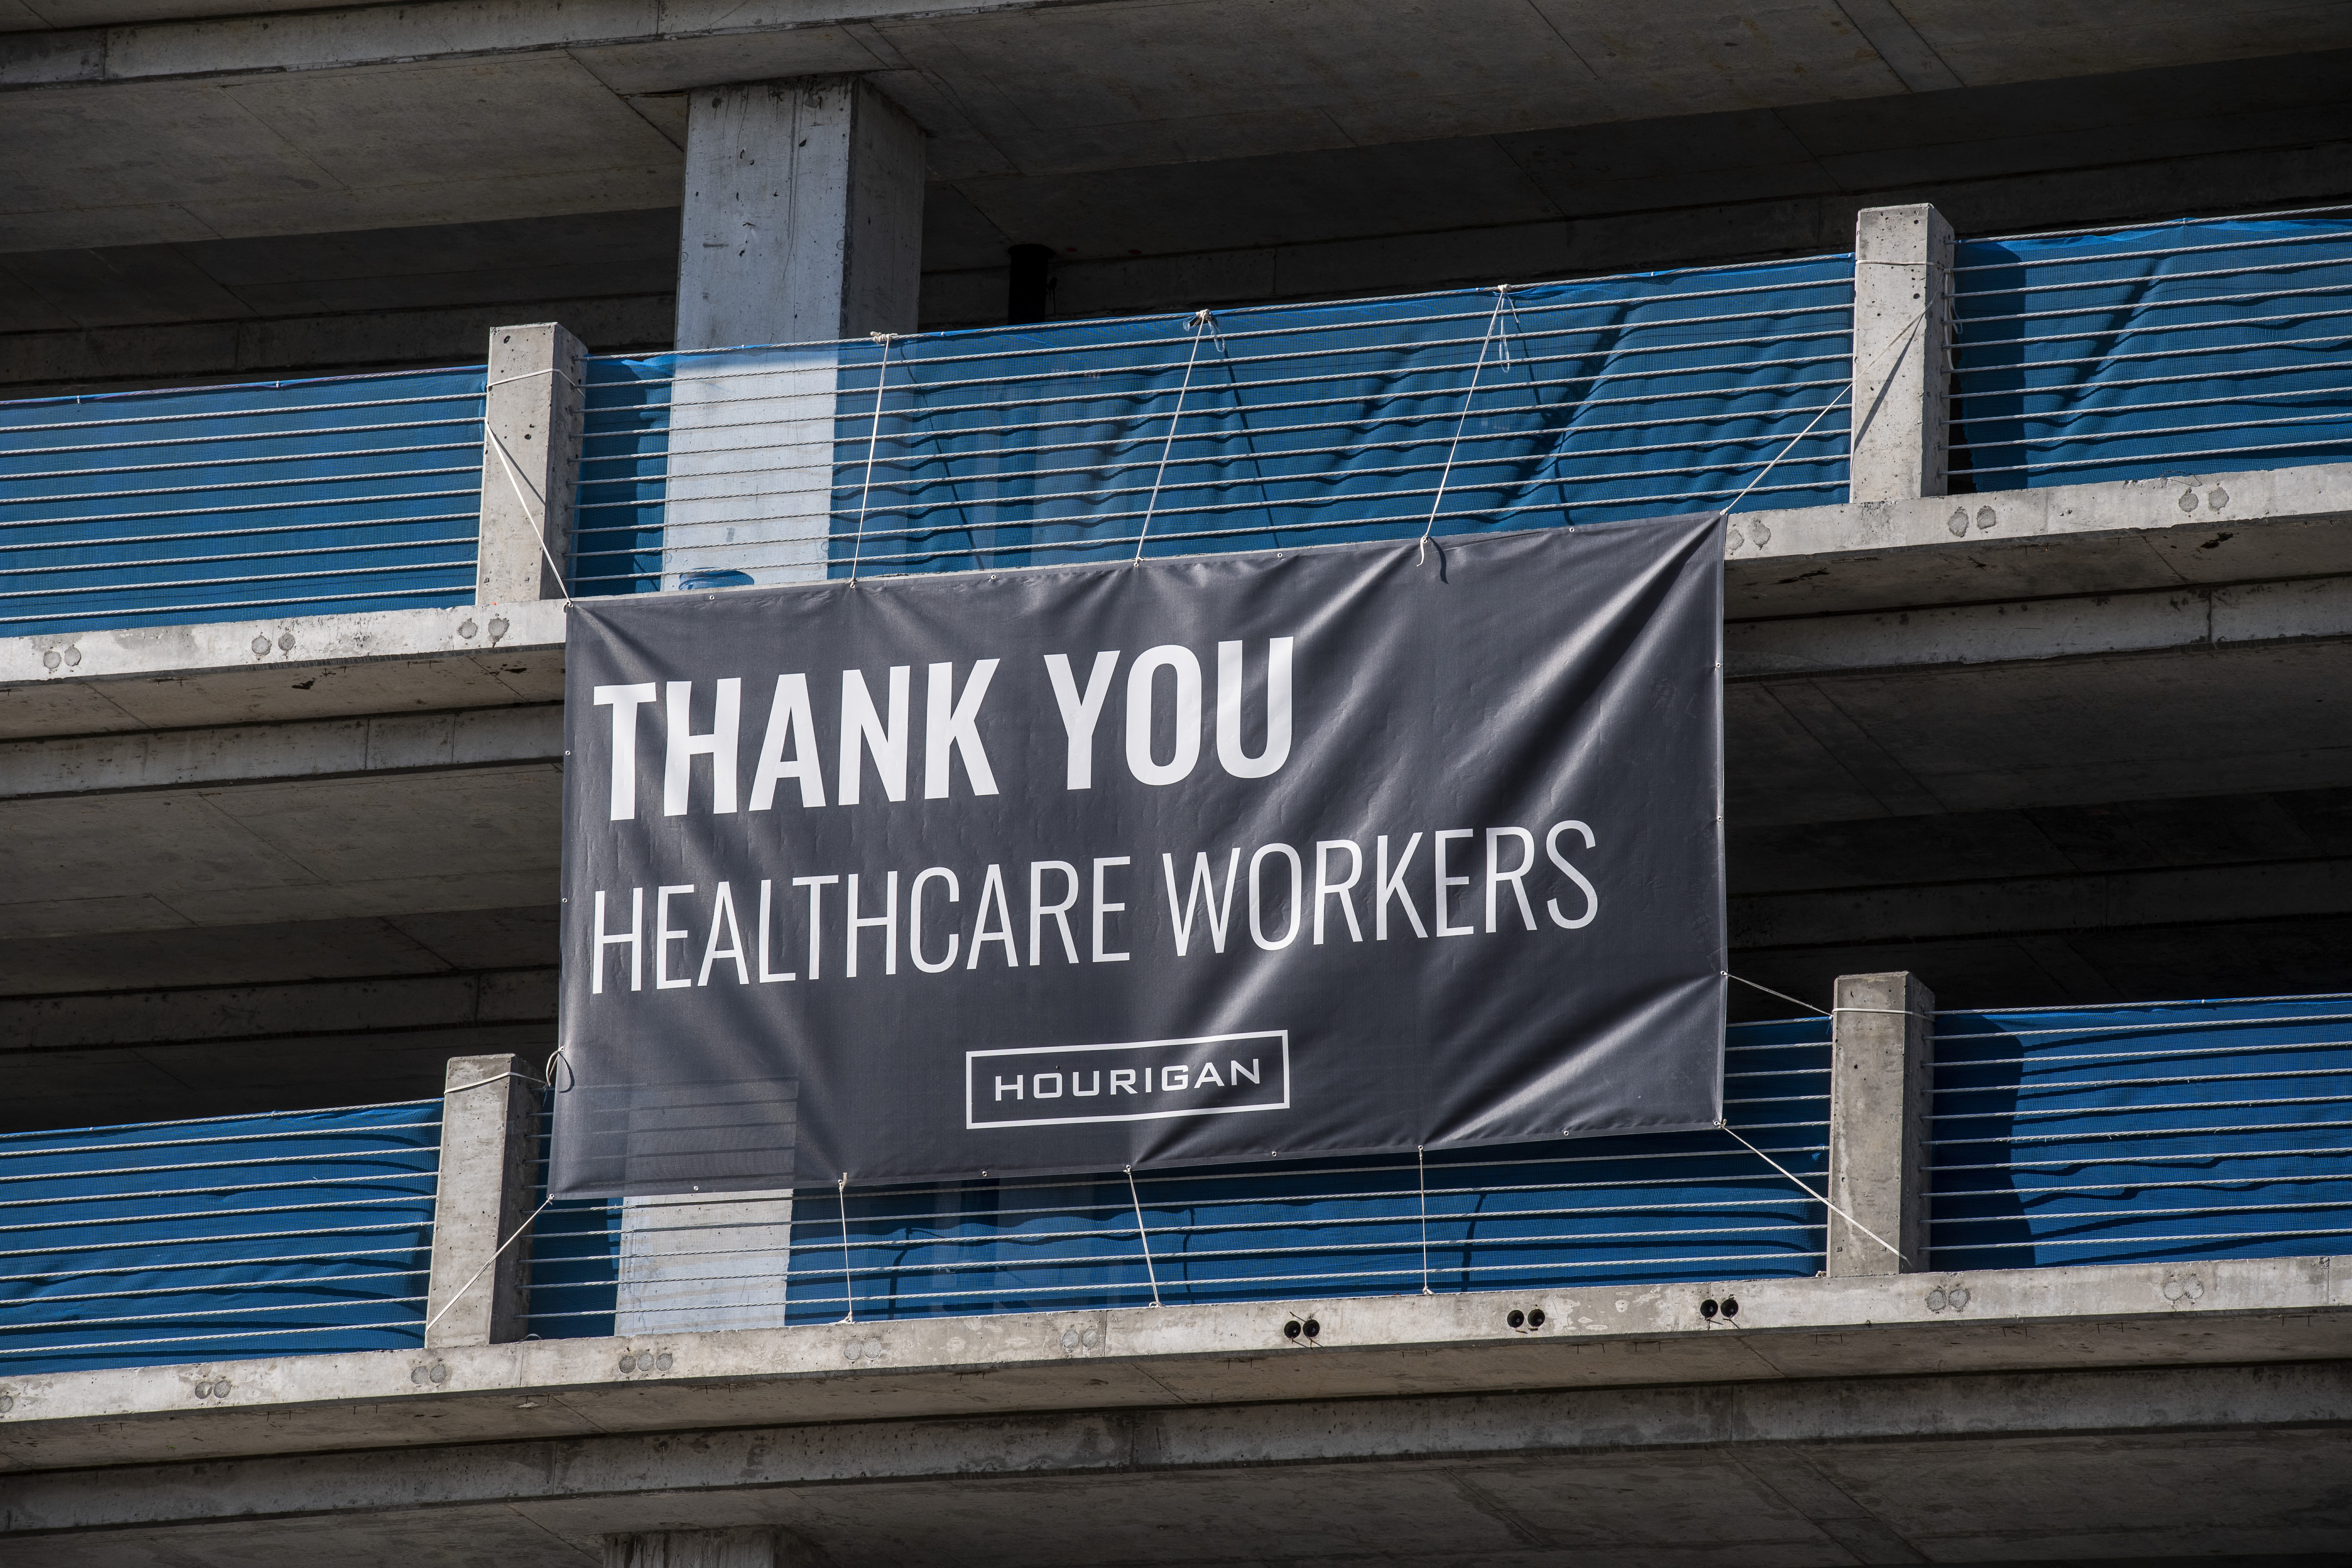 Thank you health care workers.